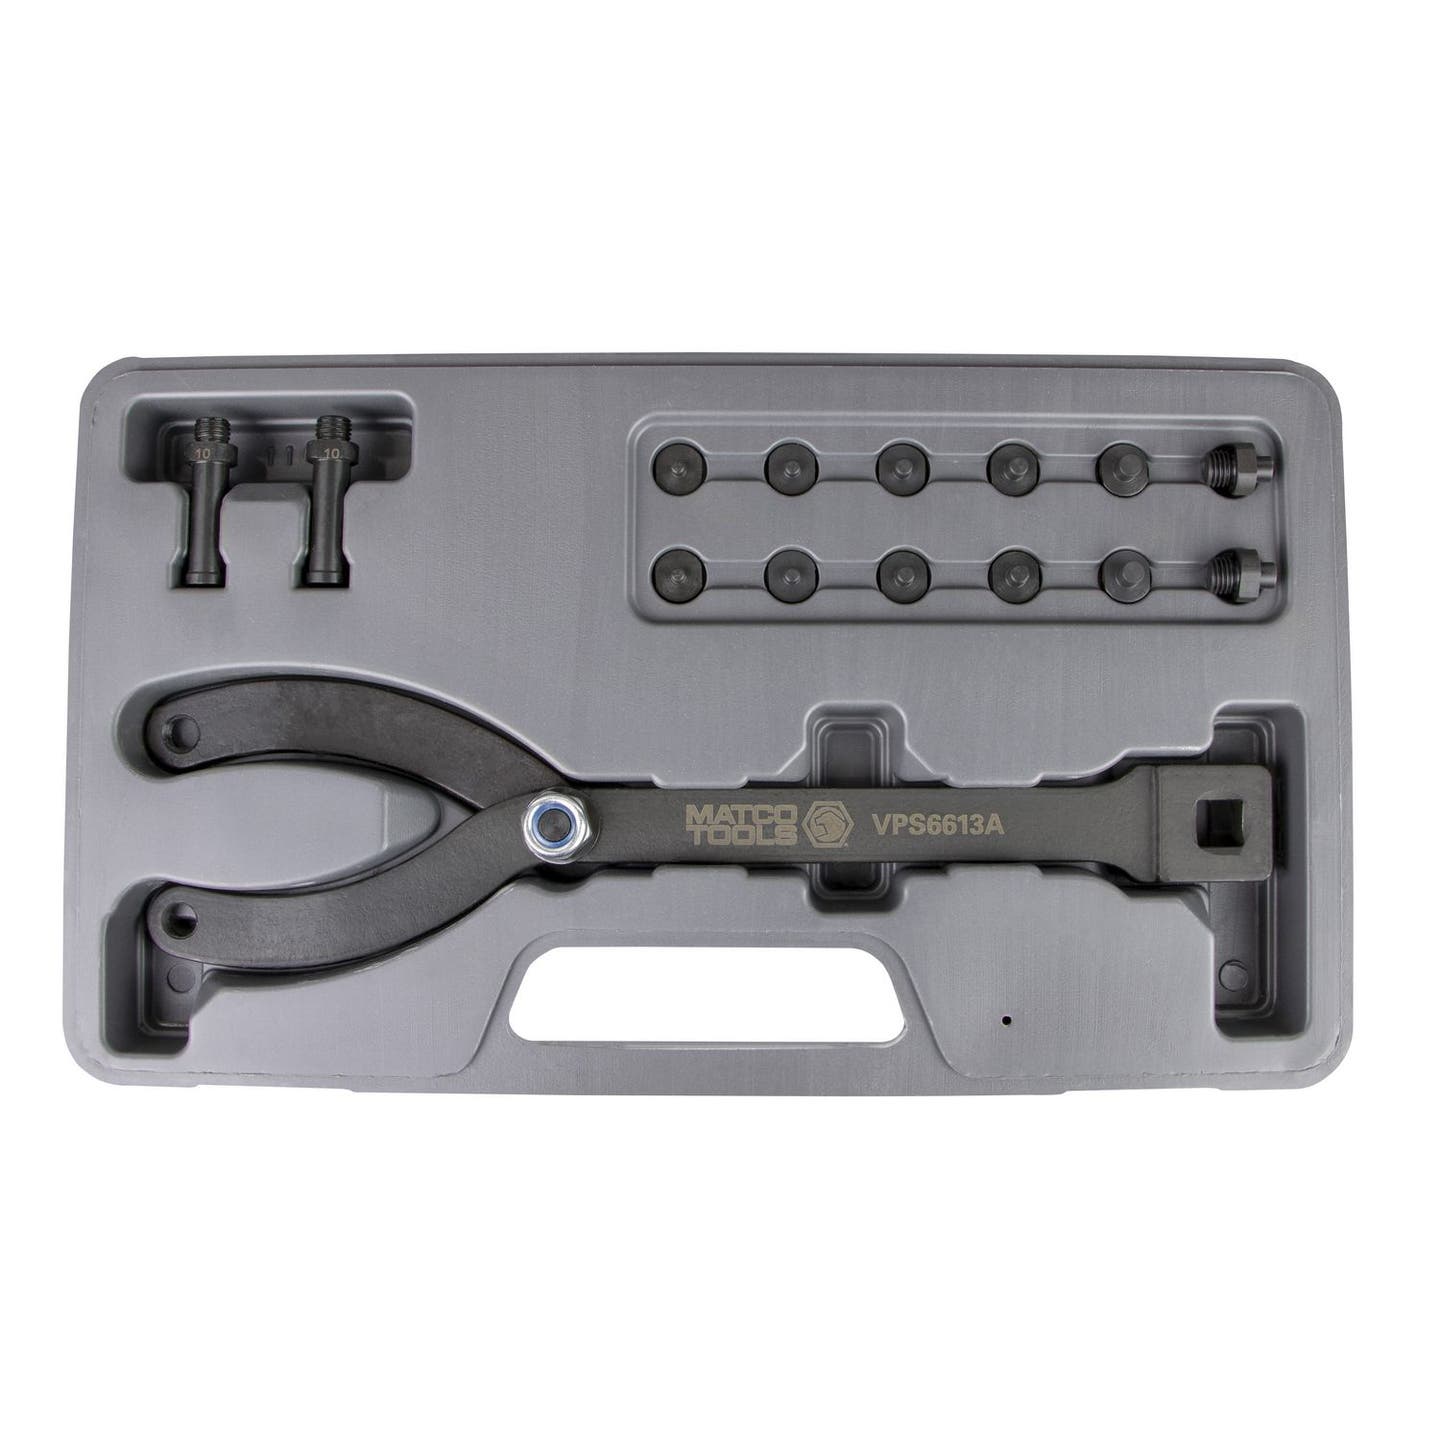 VARIABLE PIN SPANNER WRENCH